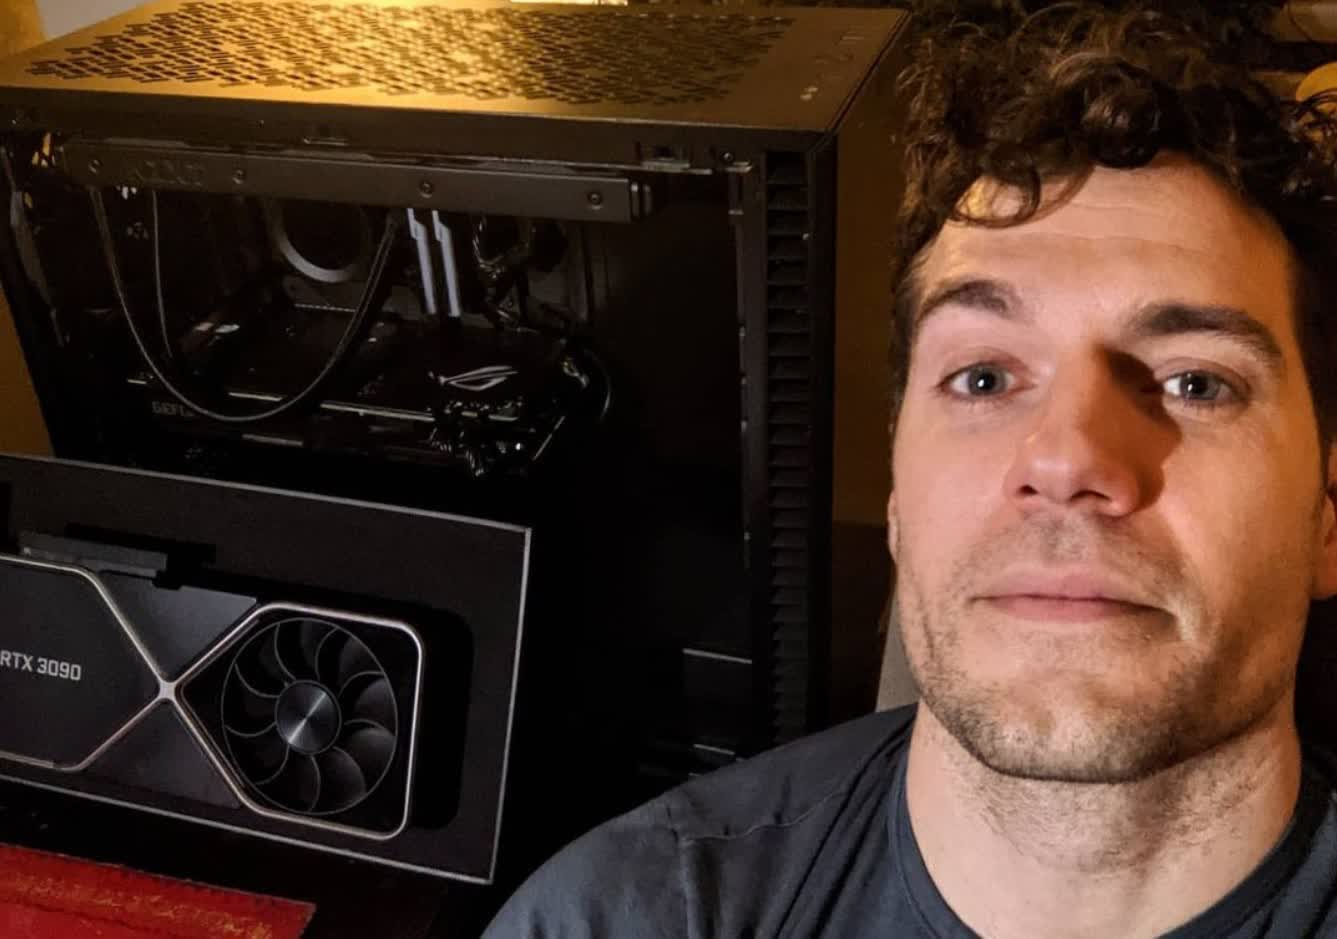 Superman/Witcher star Henry Cavill upgrades to an Nvidia RTX 3090